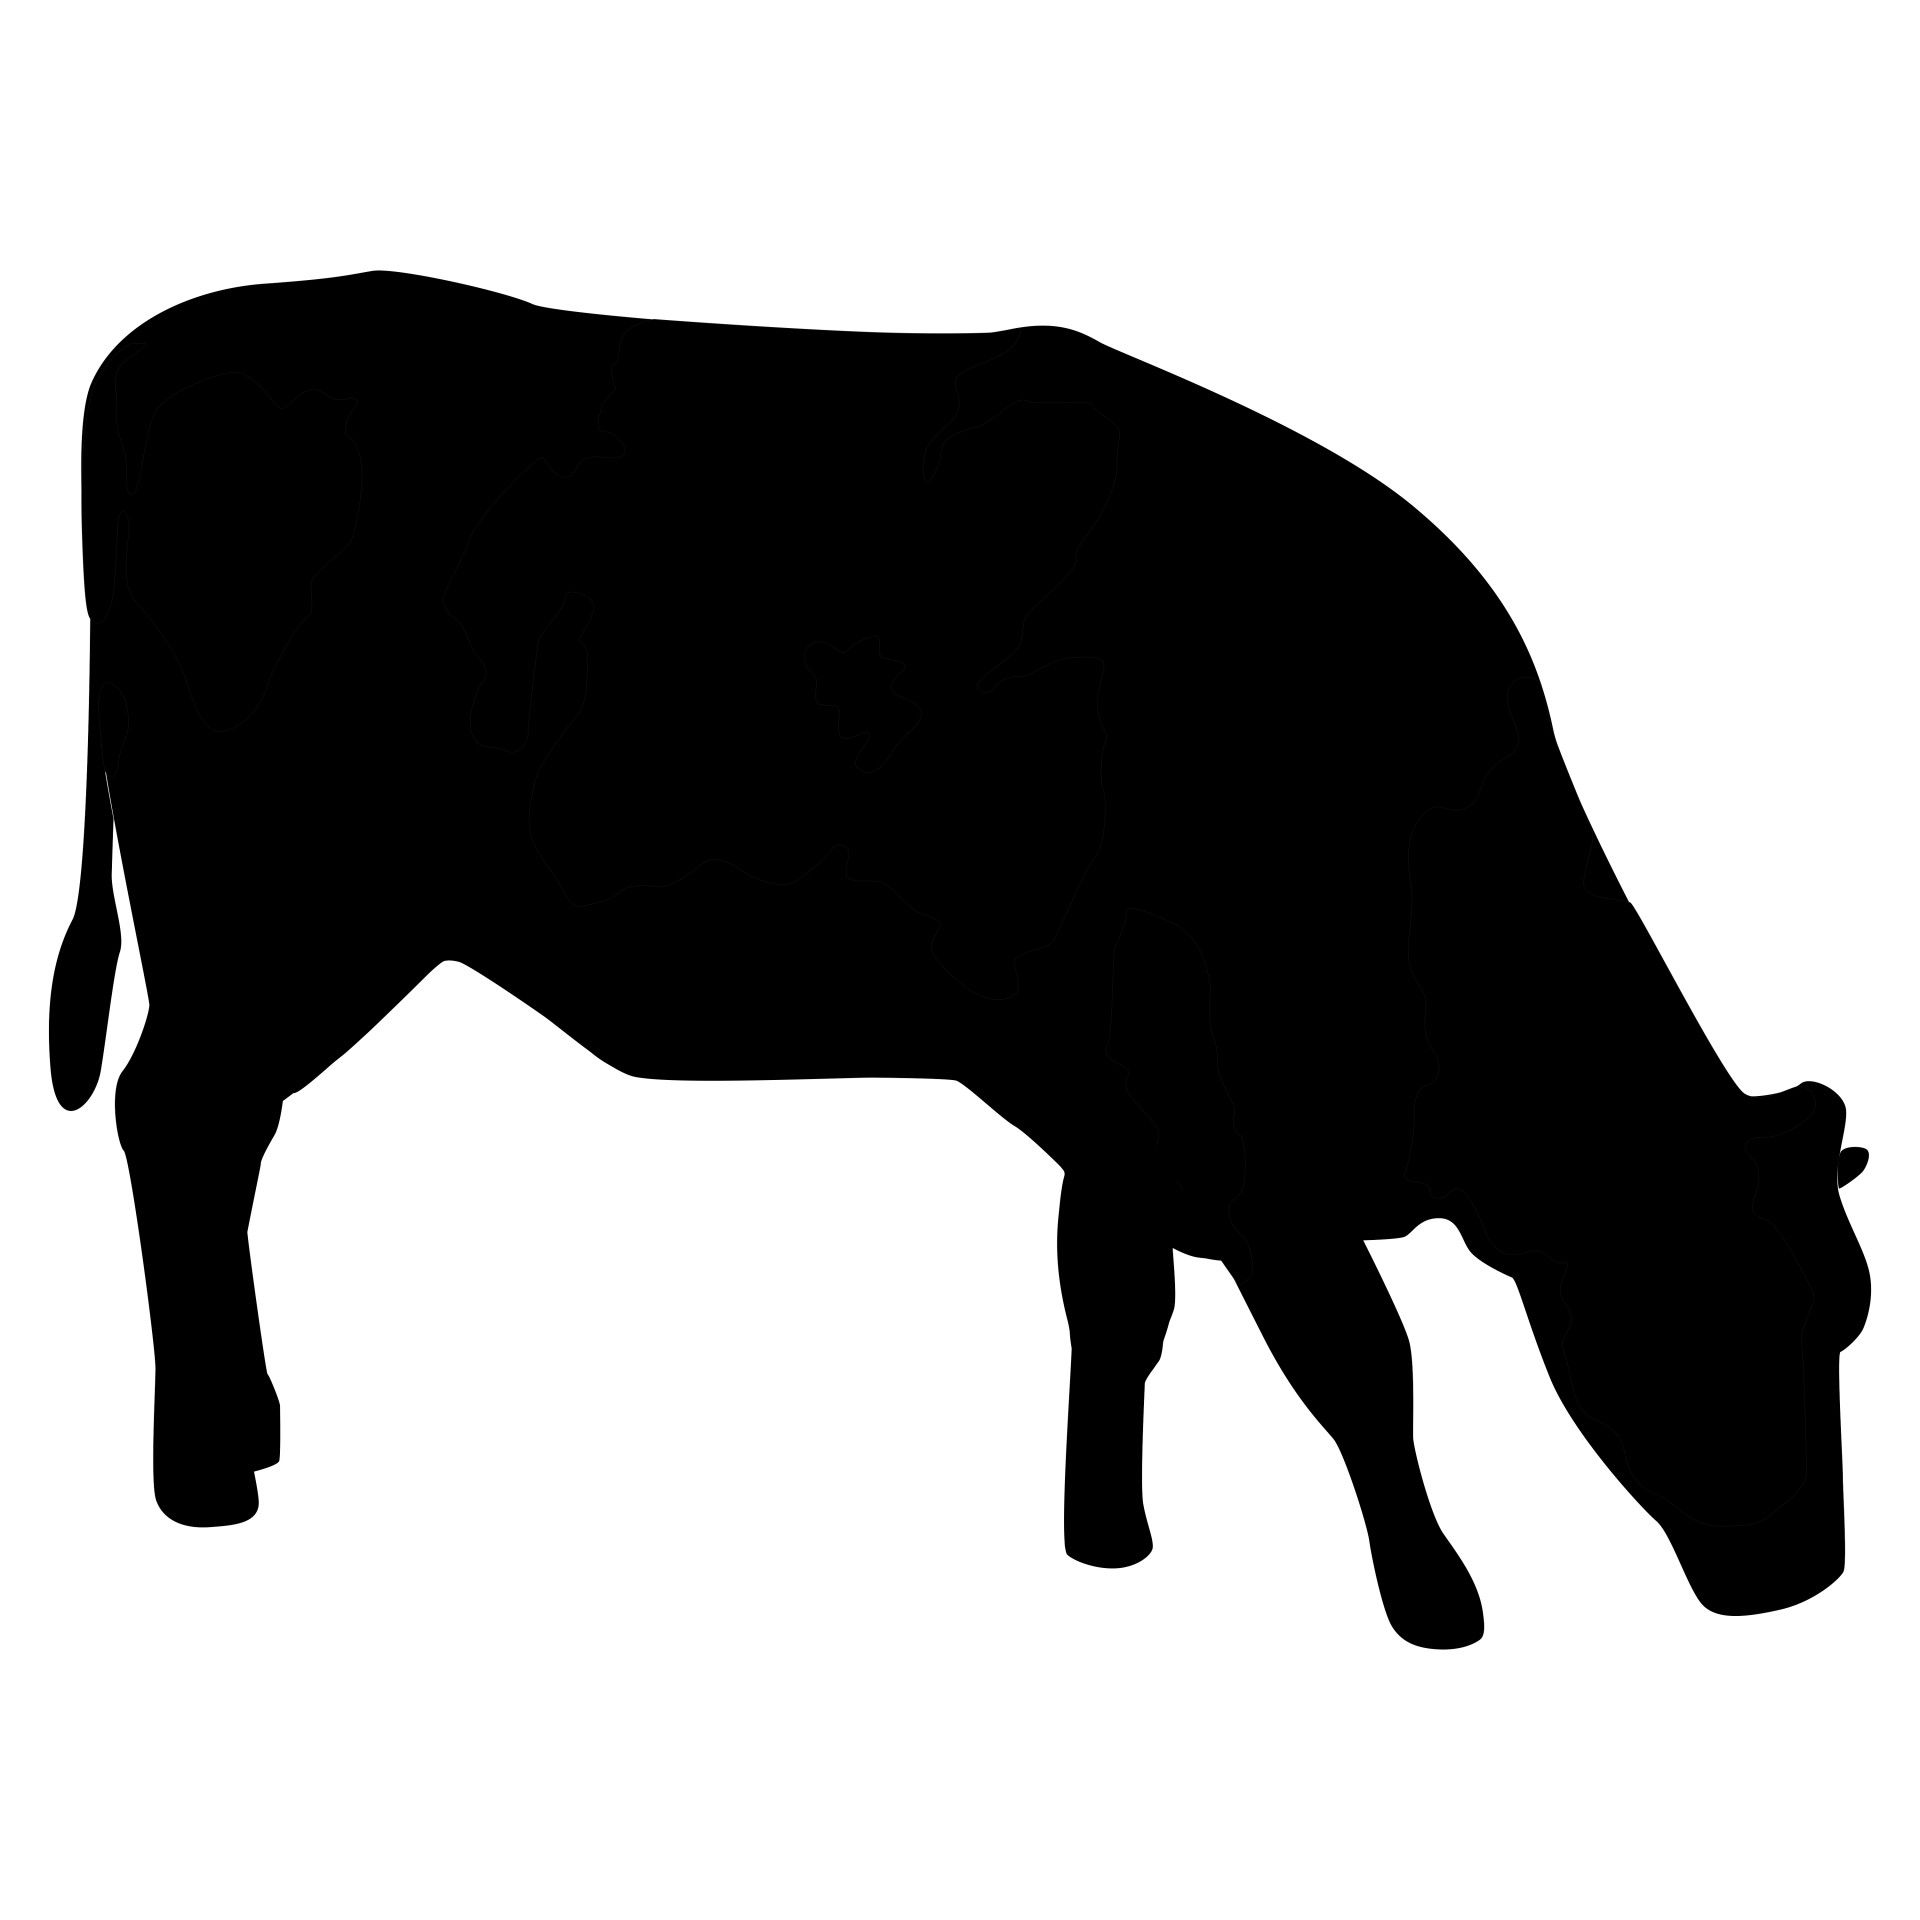 Free Show Steer Silhouette, Download Free Clip Art, Free.